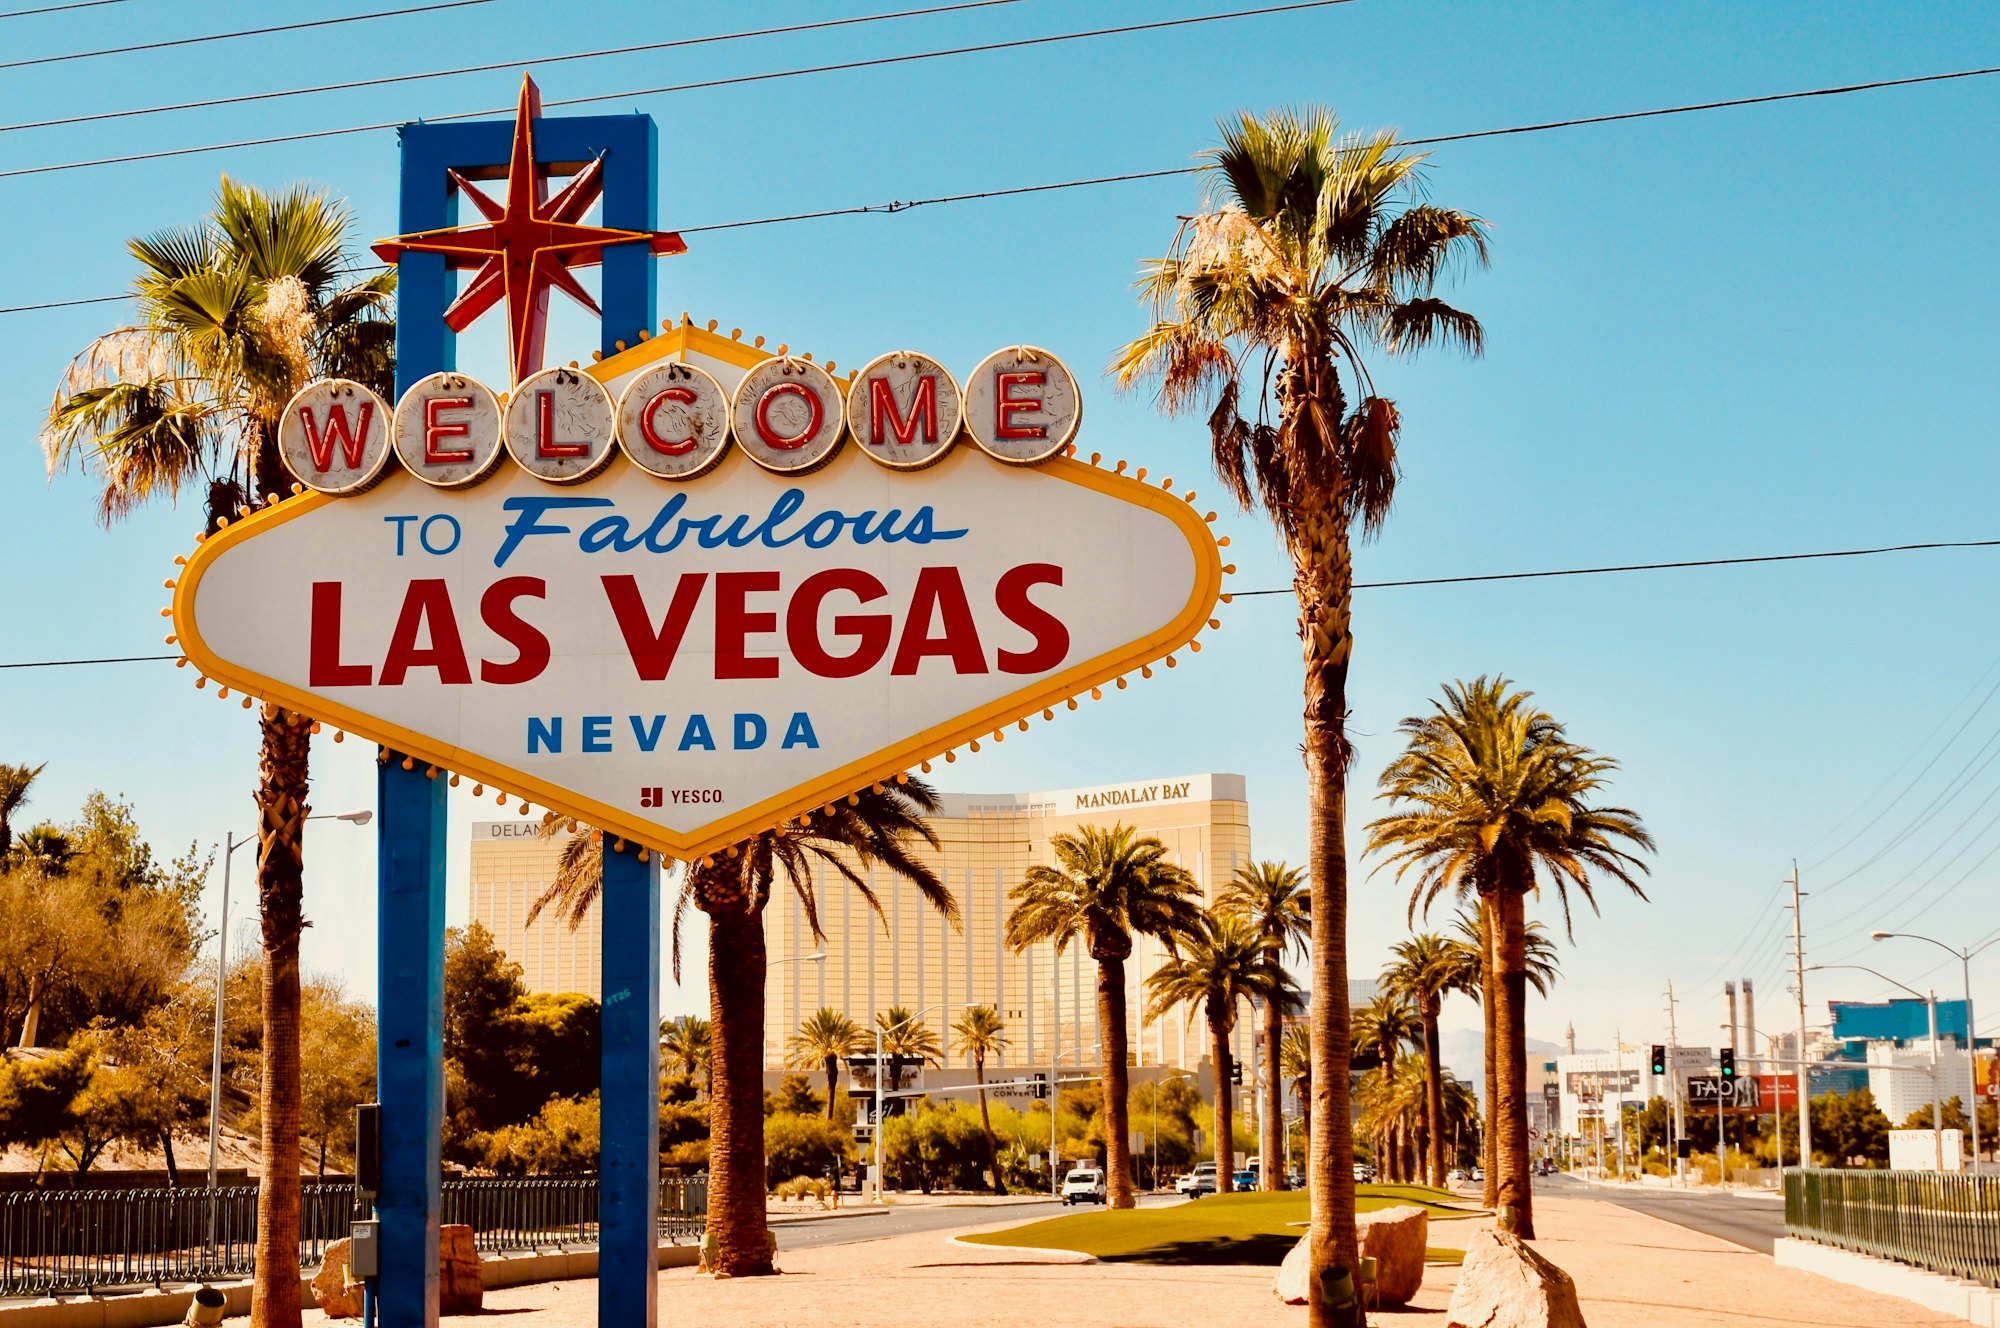 Las Vegas Multifamily Sees Rent Decreases, More Available Units